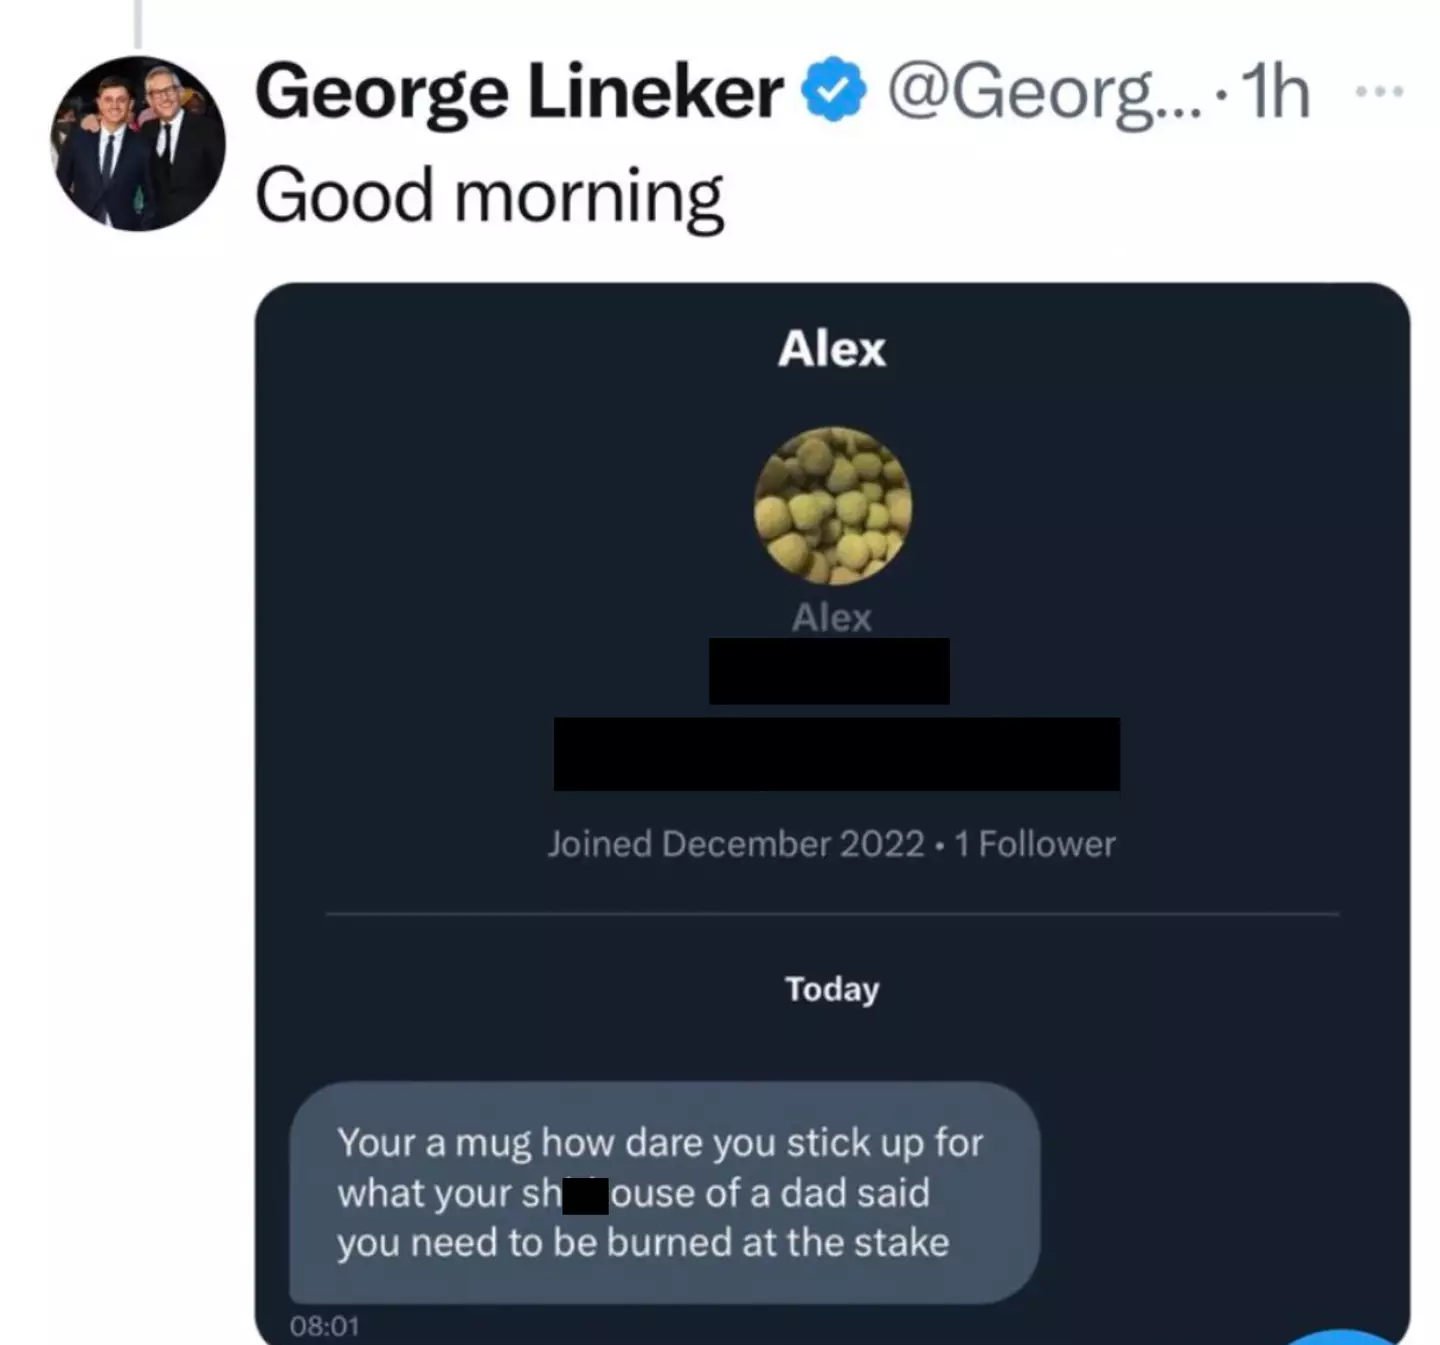 George received the message in response to Lineker's comments.